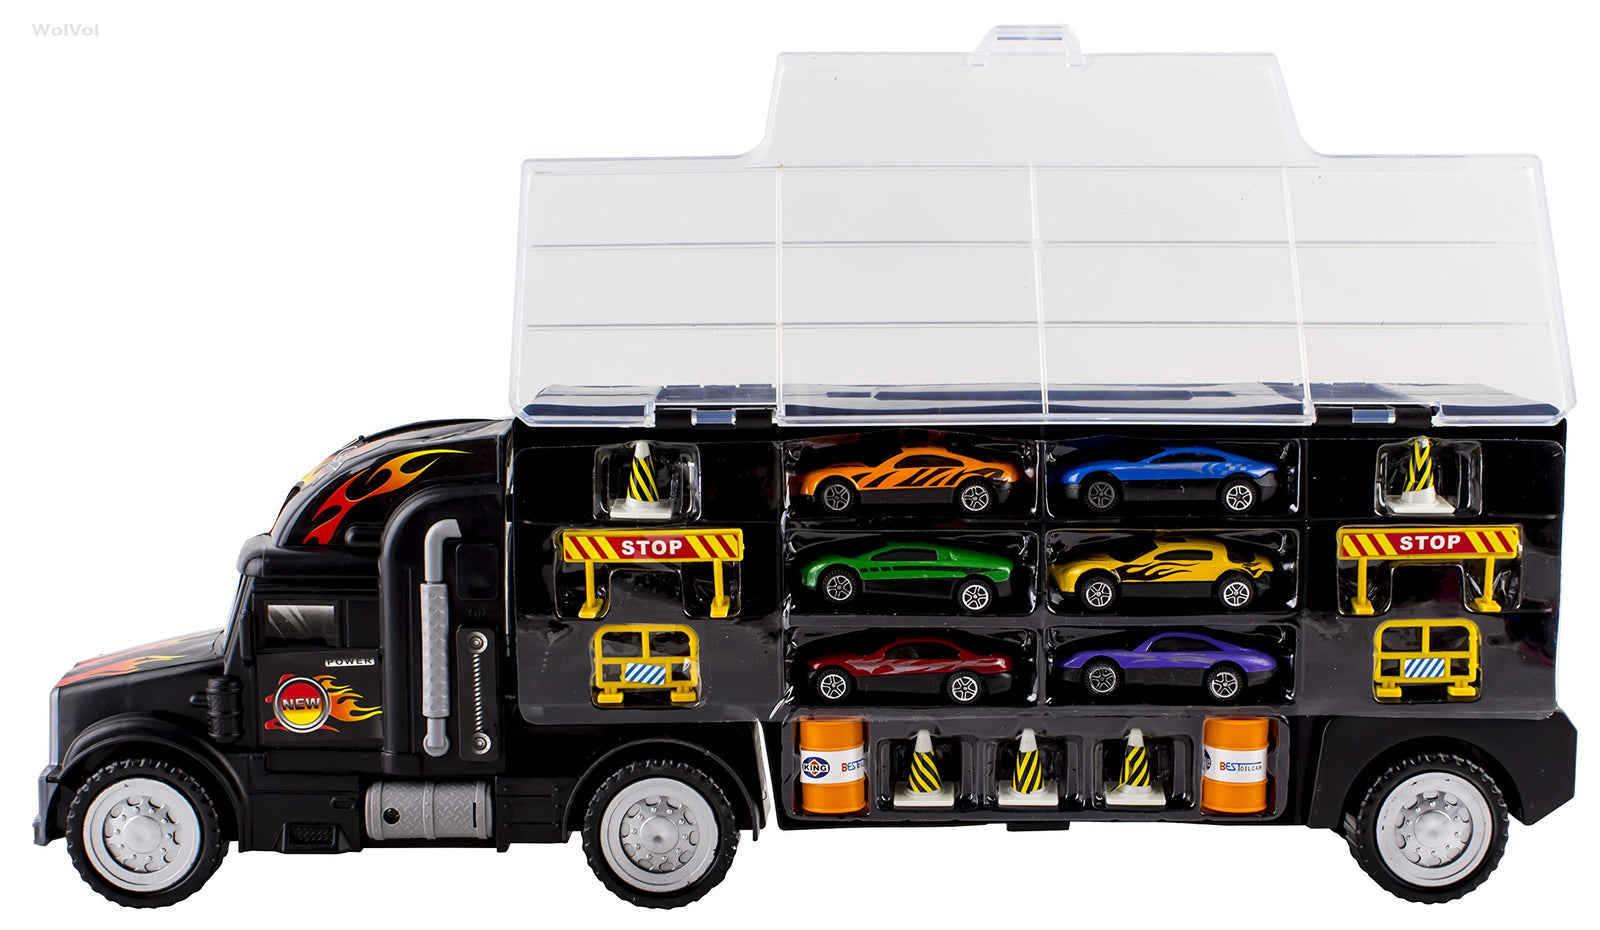 WolVolk Transport Car Carrier Truck Toy for Boys and Girls (Includes 6 Cars and 28 Slots)